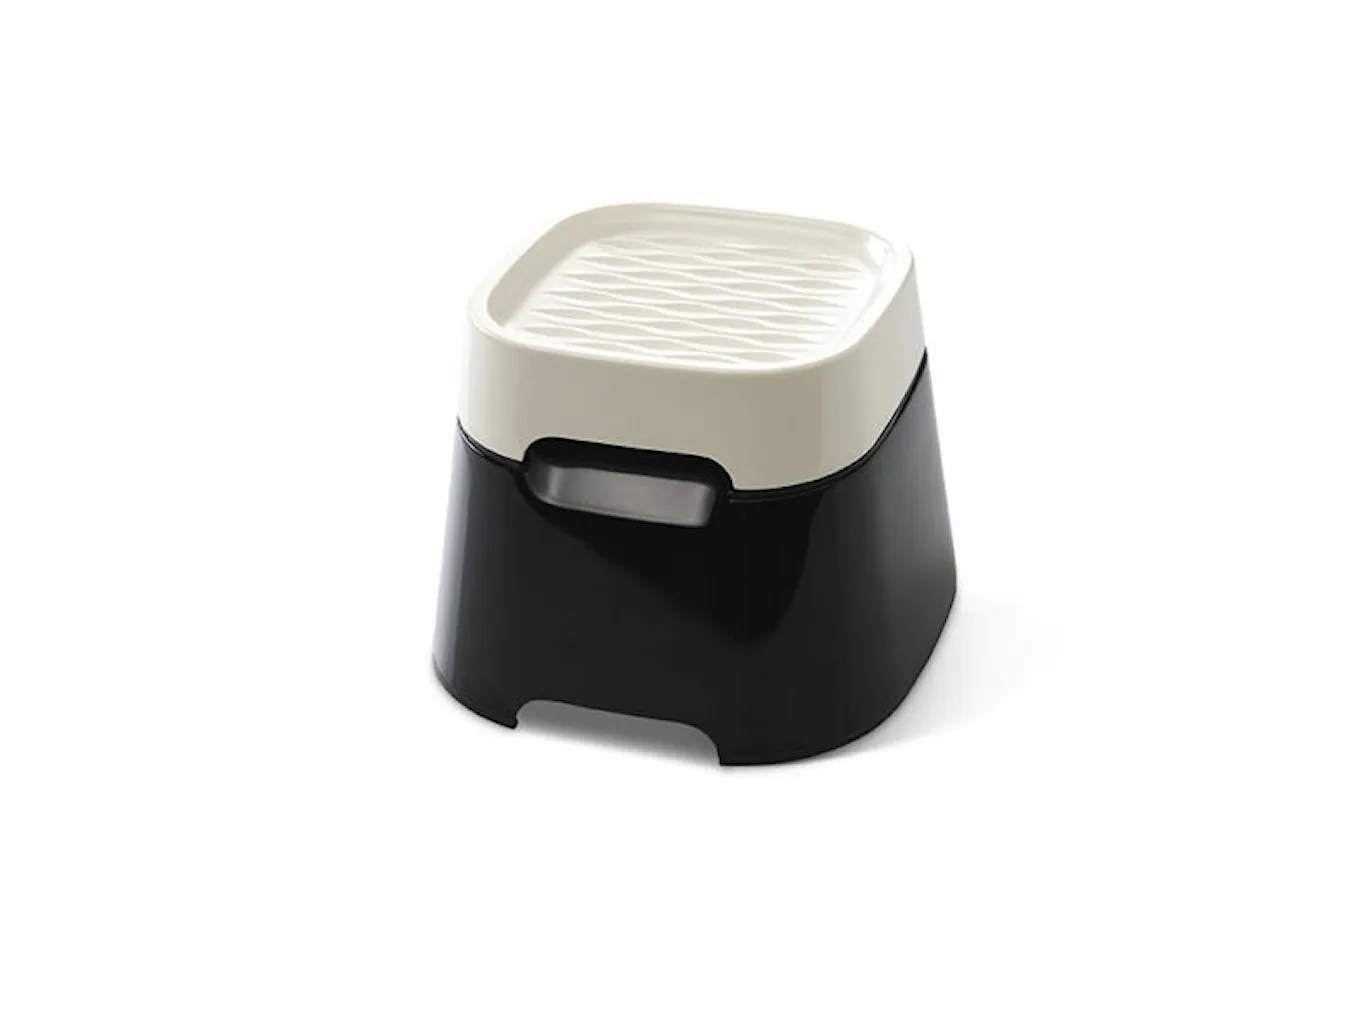 savic_dogs_cats_foodbowl_ergo_cube_elevated_004.jp